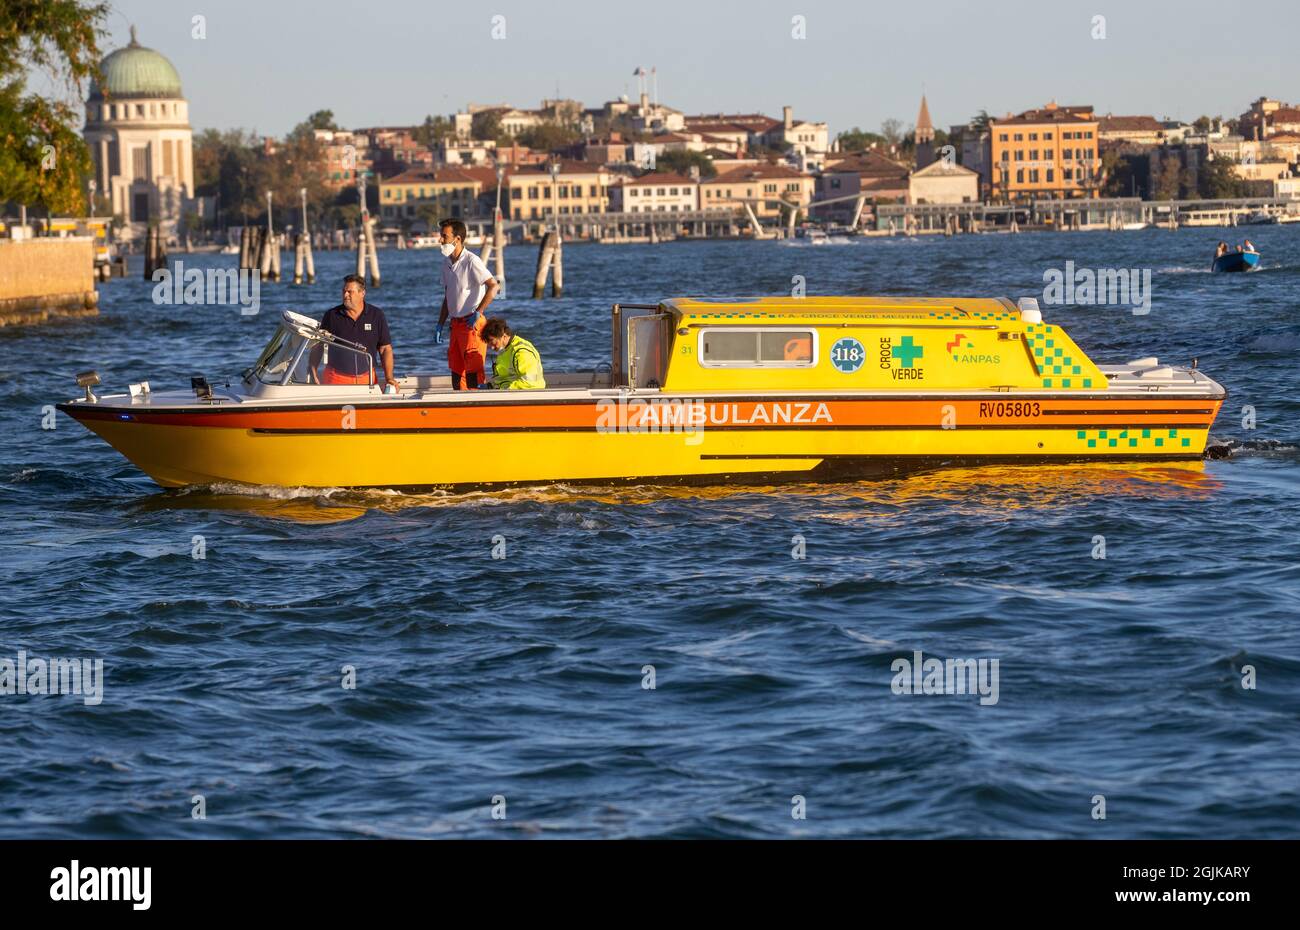 A water ambulance in the lagoon in Venice. Venice's fragile eco-system is protected by Laws that protect Mega Cruise ships from entering the lagoon. Stock Photo